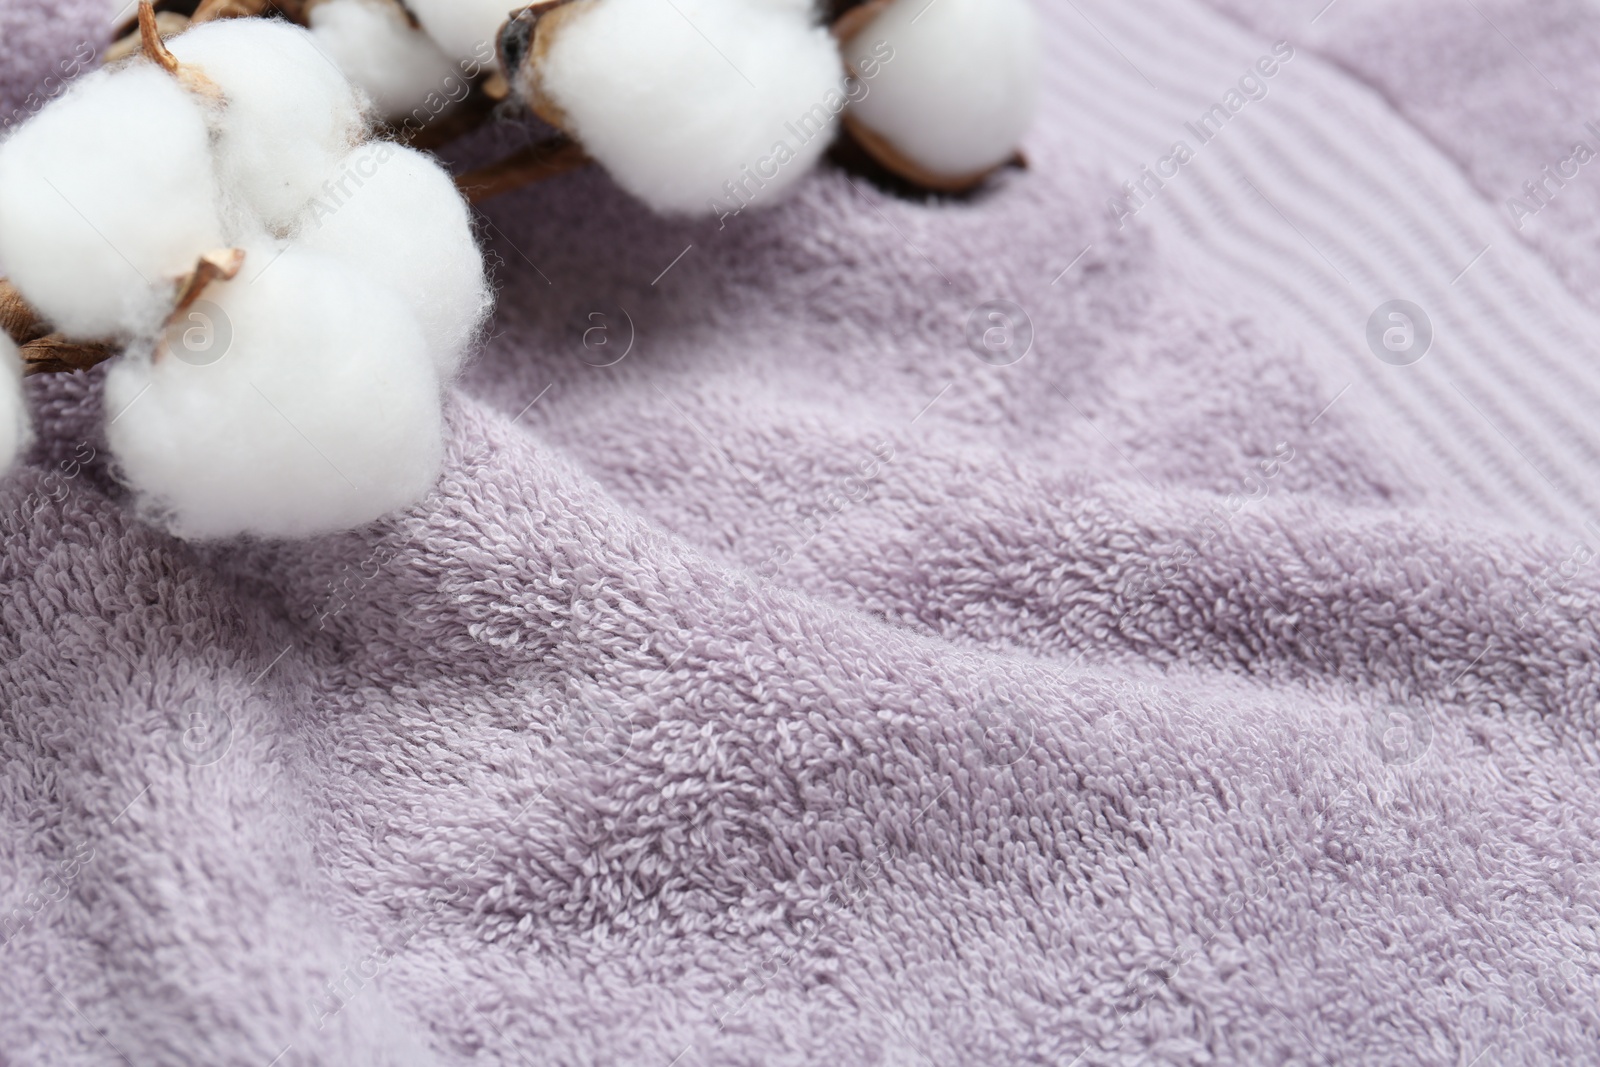 Photo of Cotton flowers on violet terry towel, closeup. Space for text